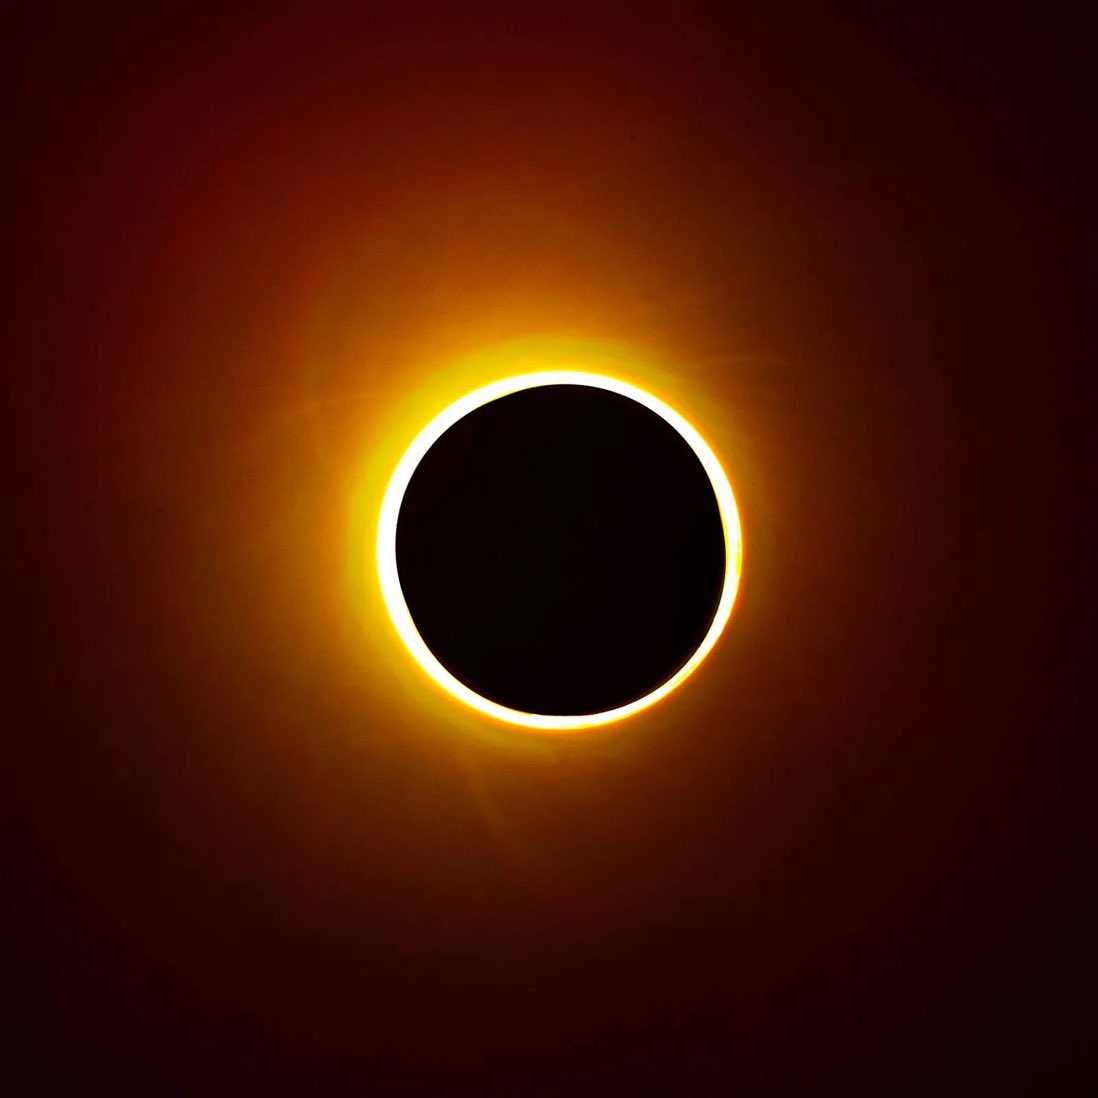 The next total solar eclipse will be visible again from the US on August 12, 2045